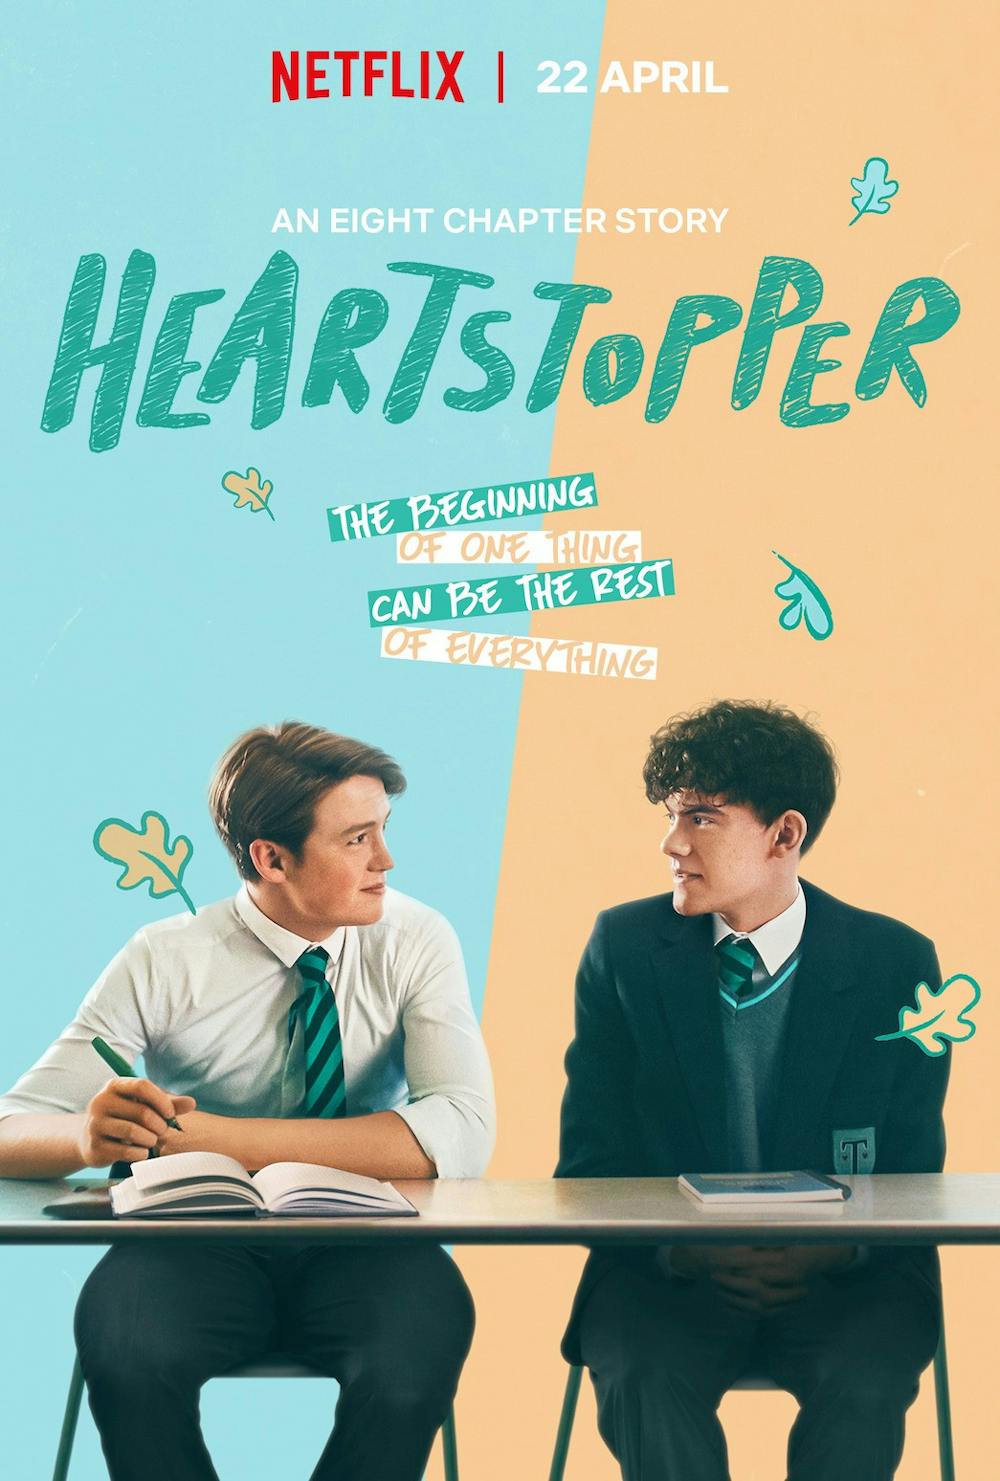 Review: Netflix’s ‘Heartstopper’ series will make your heart skip a beat